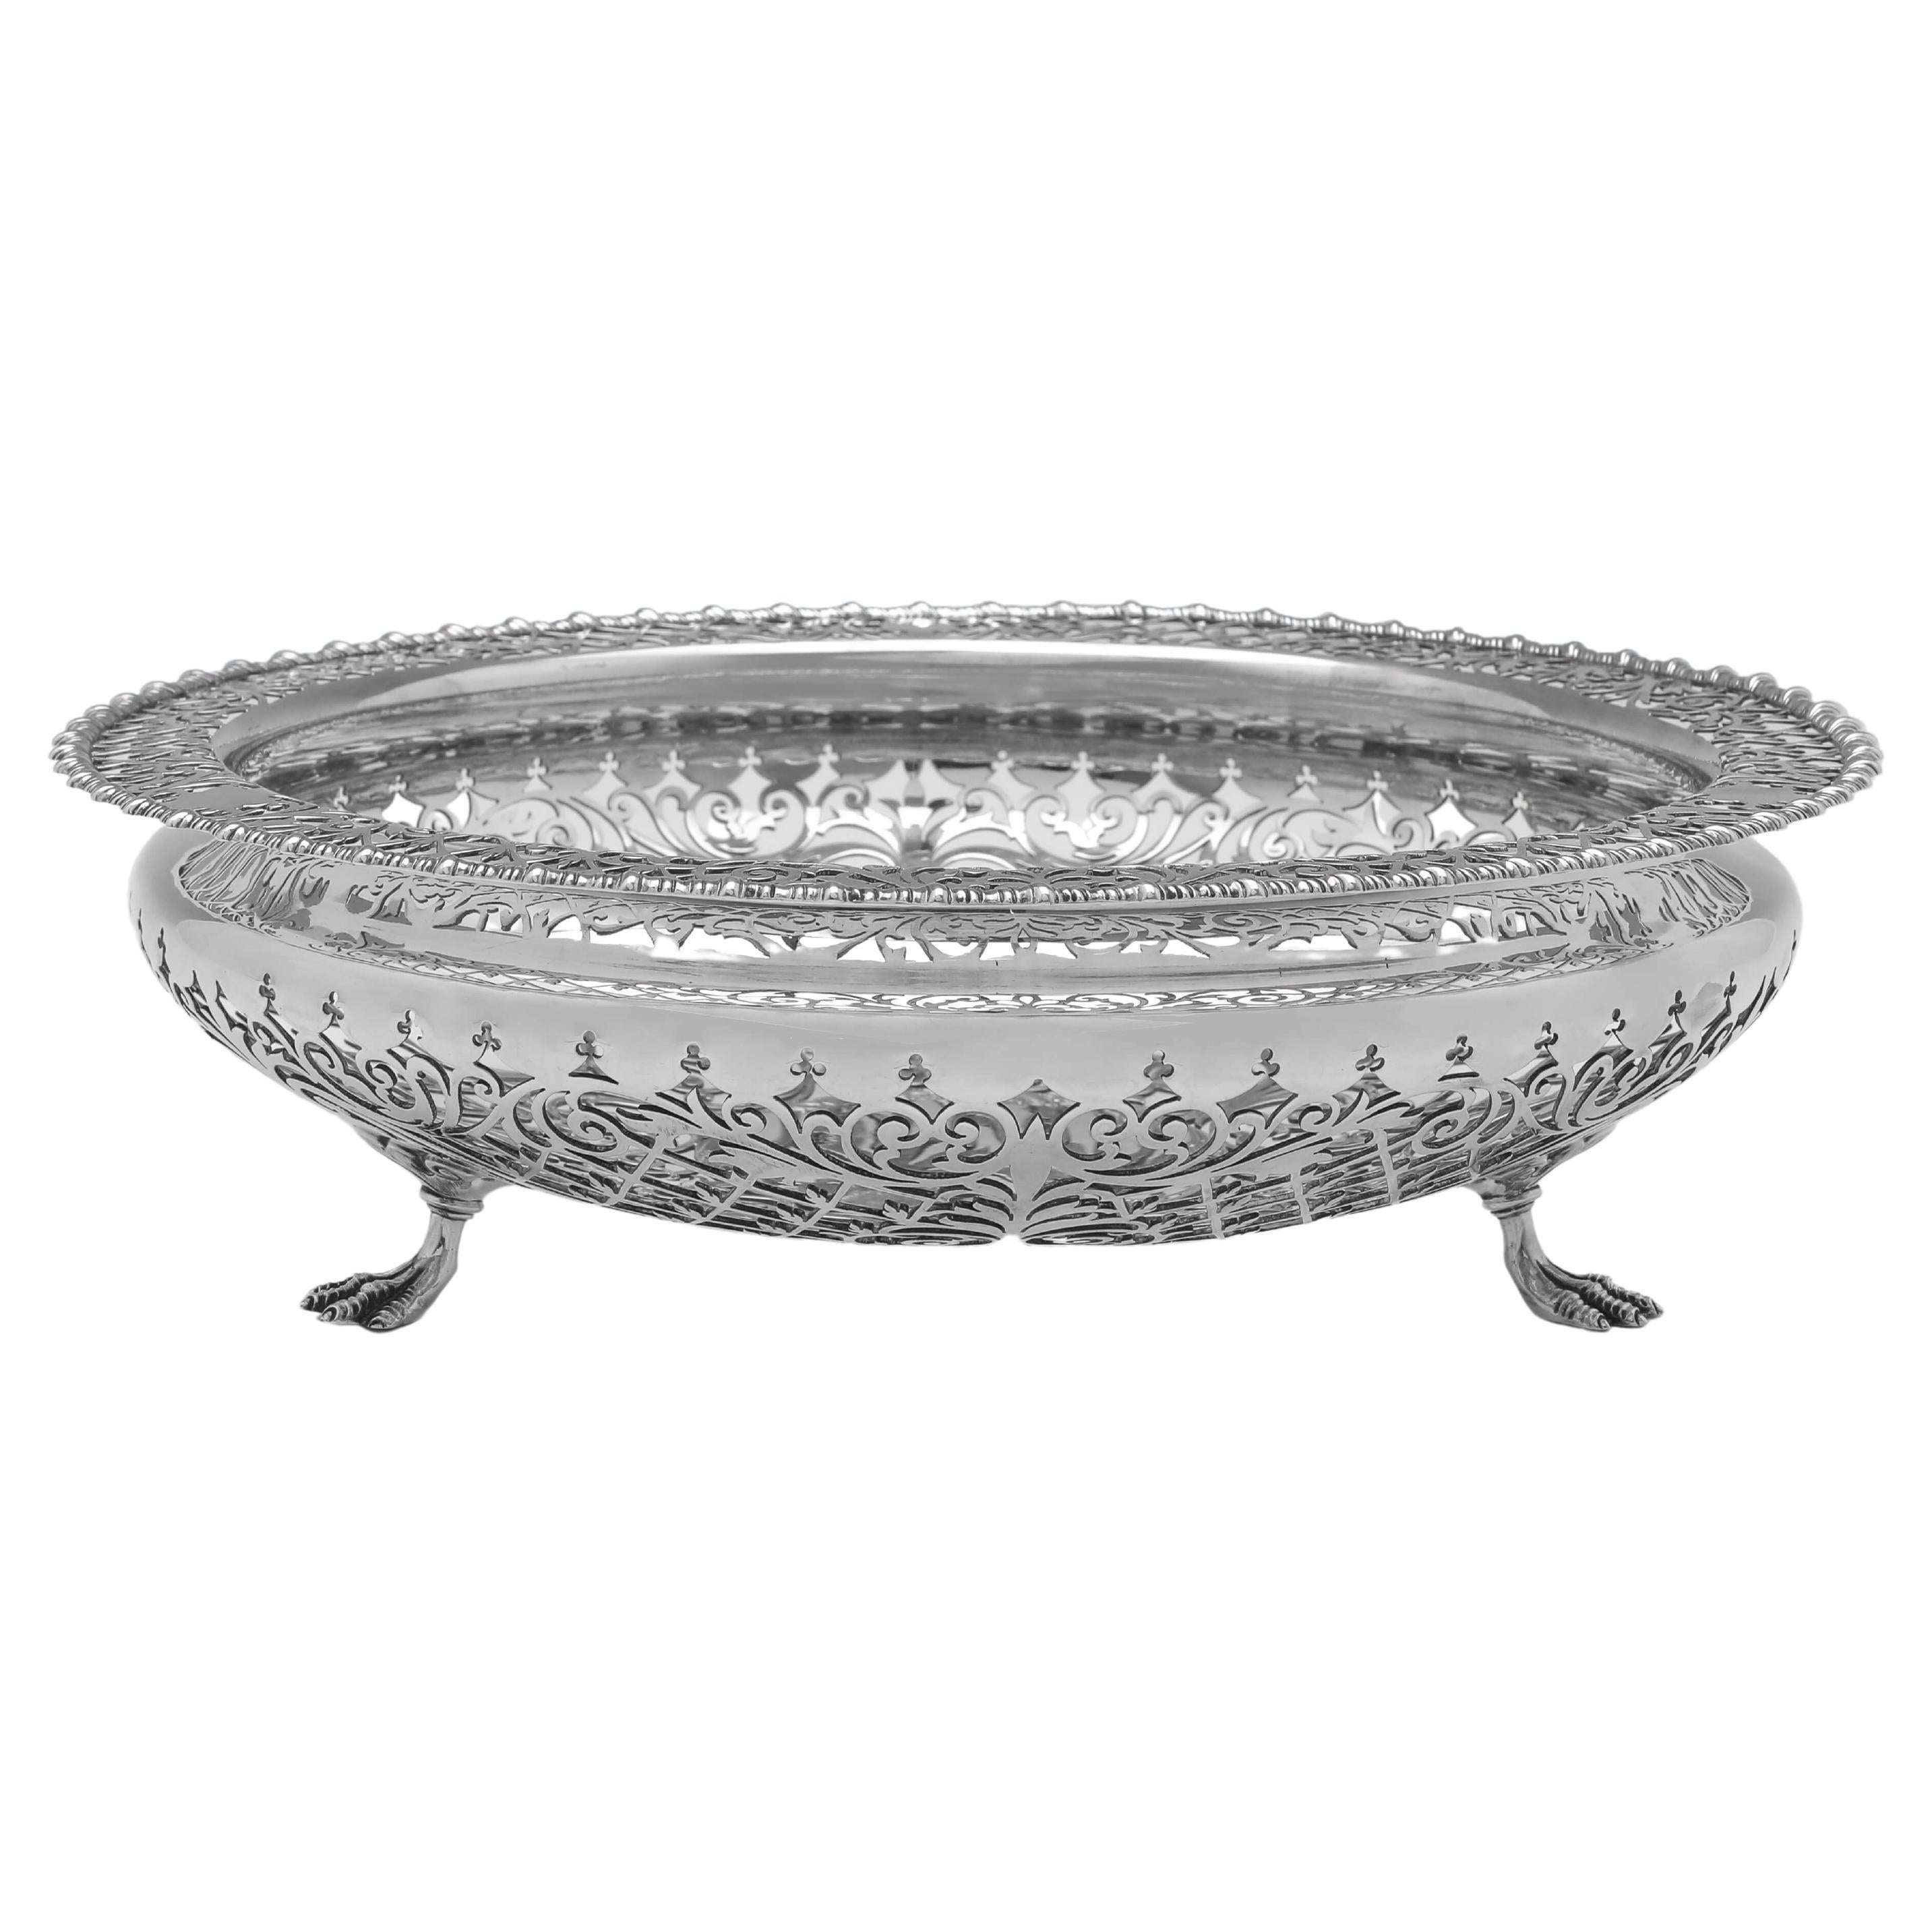 Attractive Edwardian Antique English Silver Bowl or Dish, Sheffield 1905 For Sale